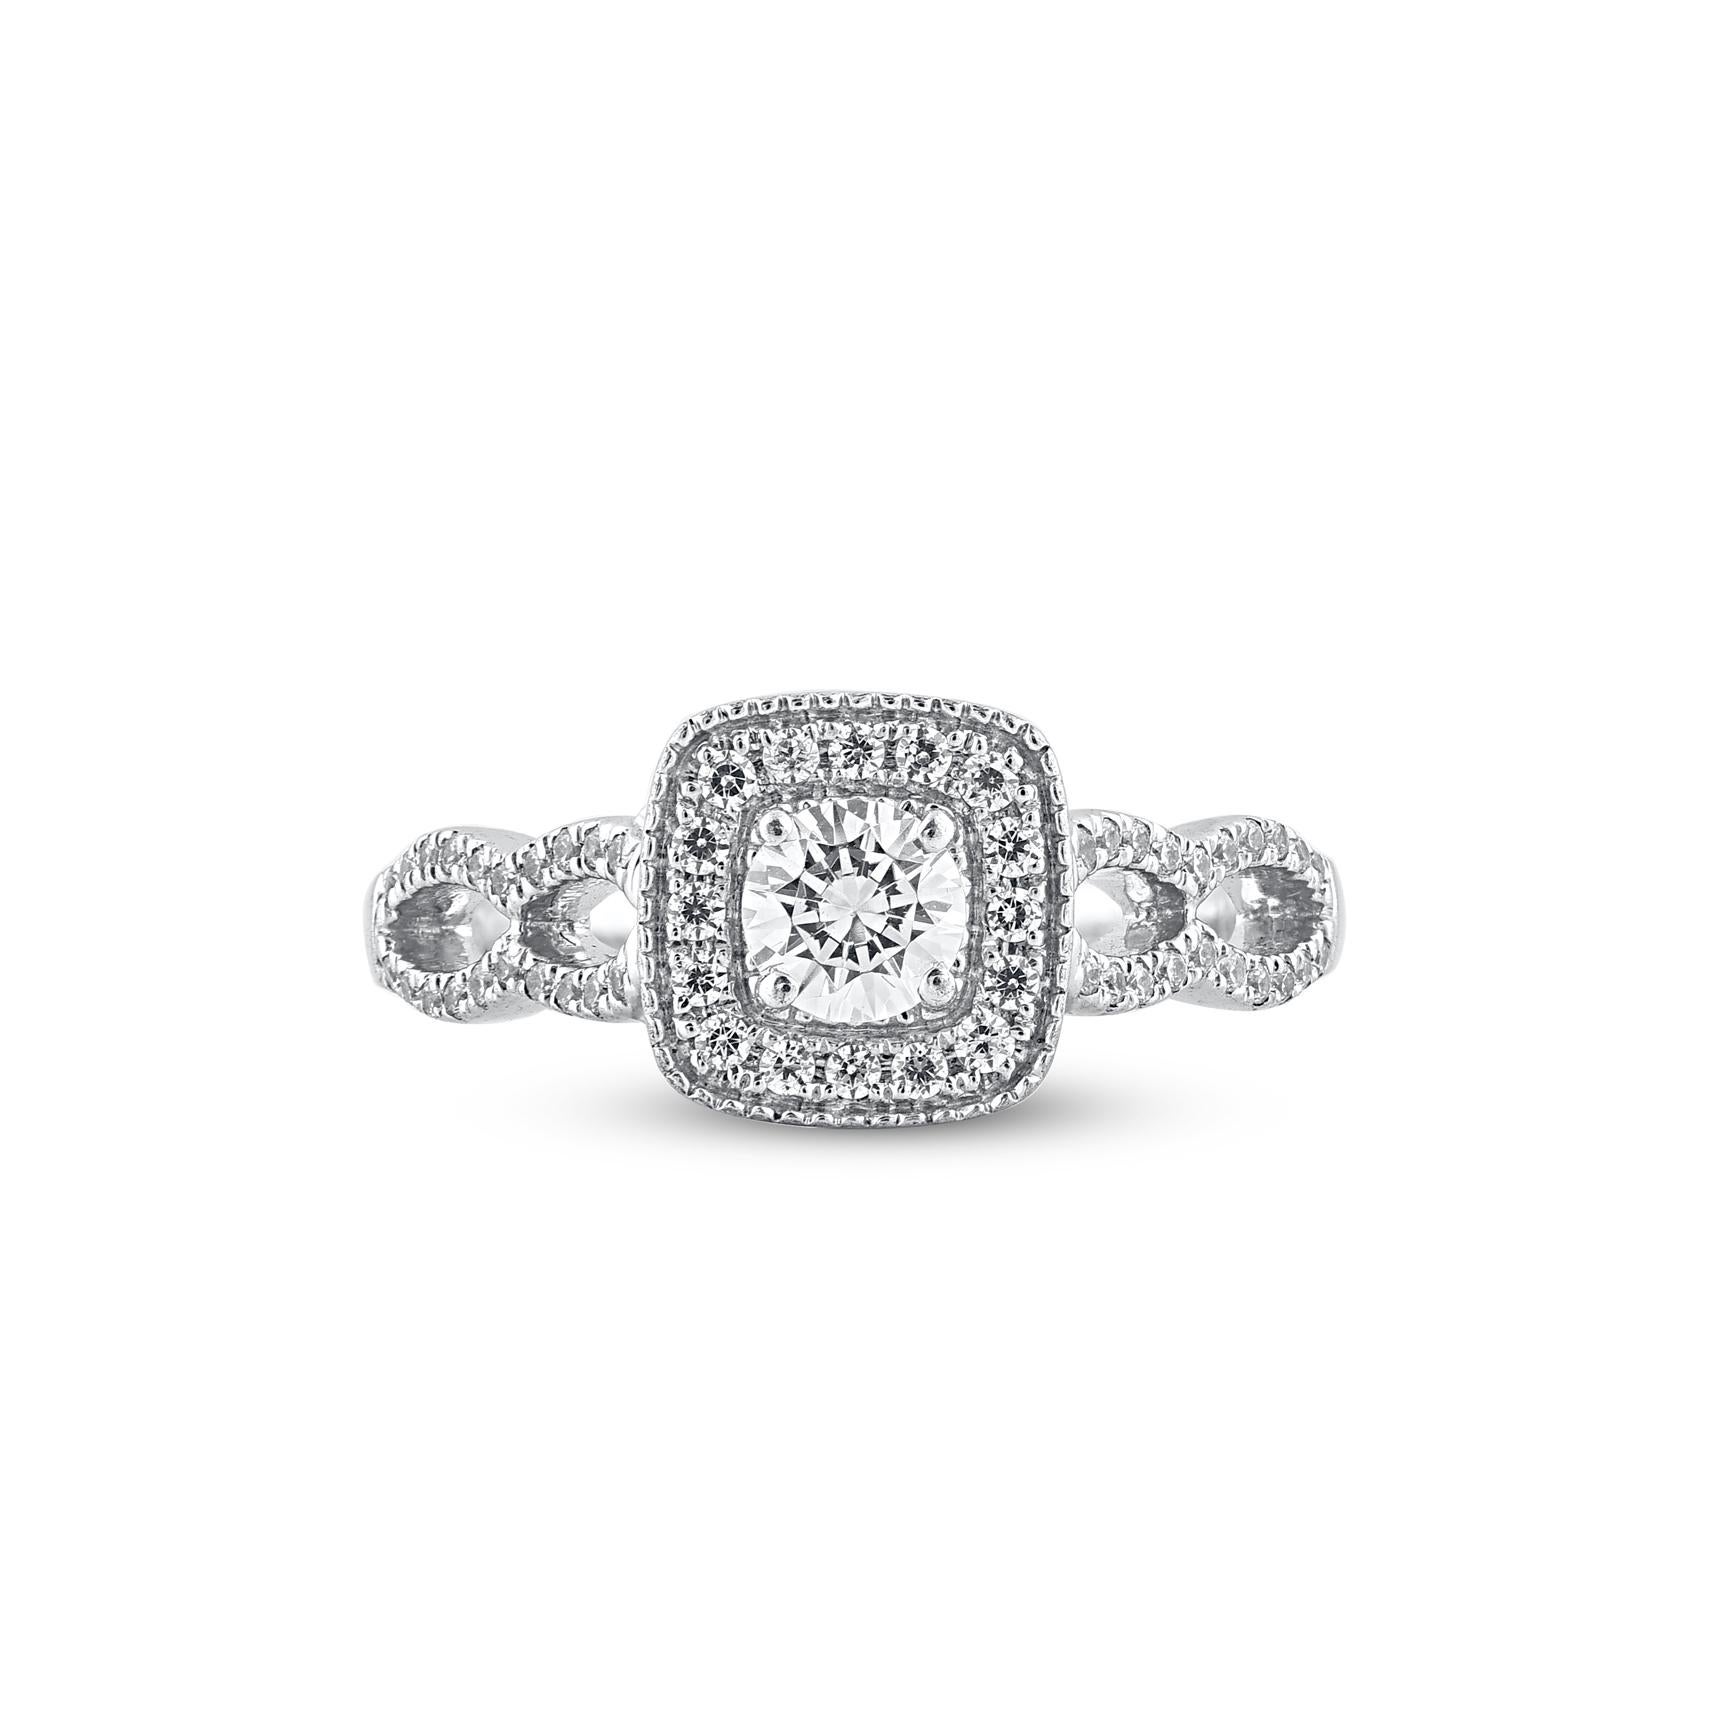 Add a touch of elegance with this diamond engagement ring. These diamond ring are studded with 75 single cut and brilliant cut round diamonds in prong and pave setting and crafted in 14KT white gold. The white diamonds are graded as H-I color and I2